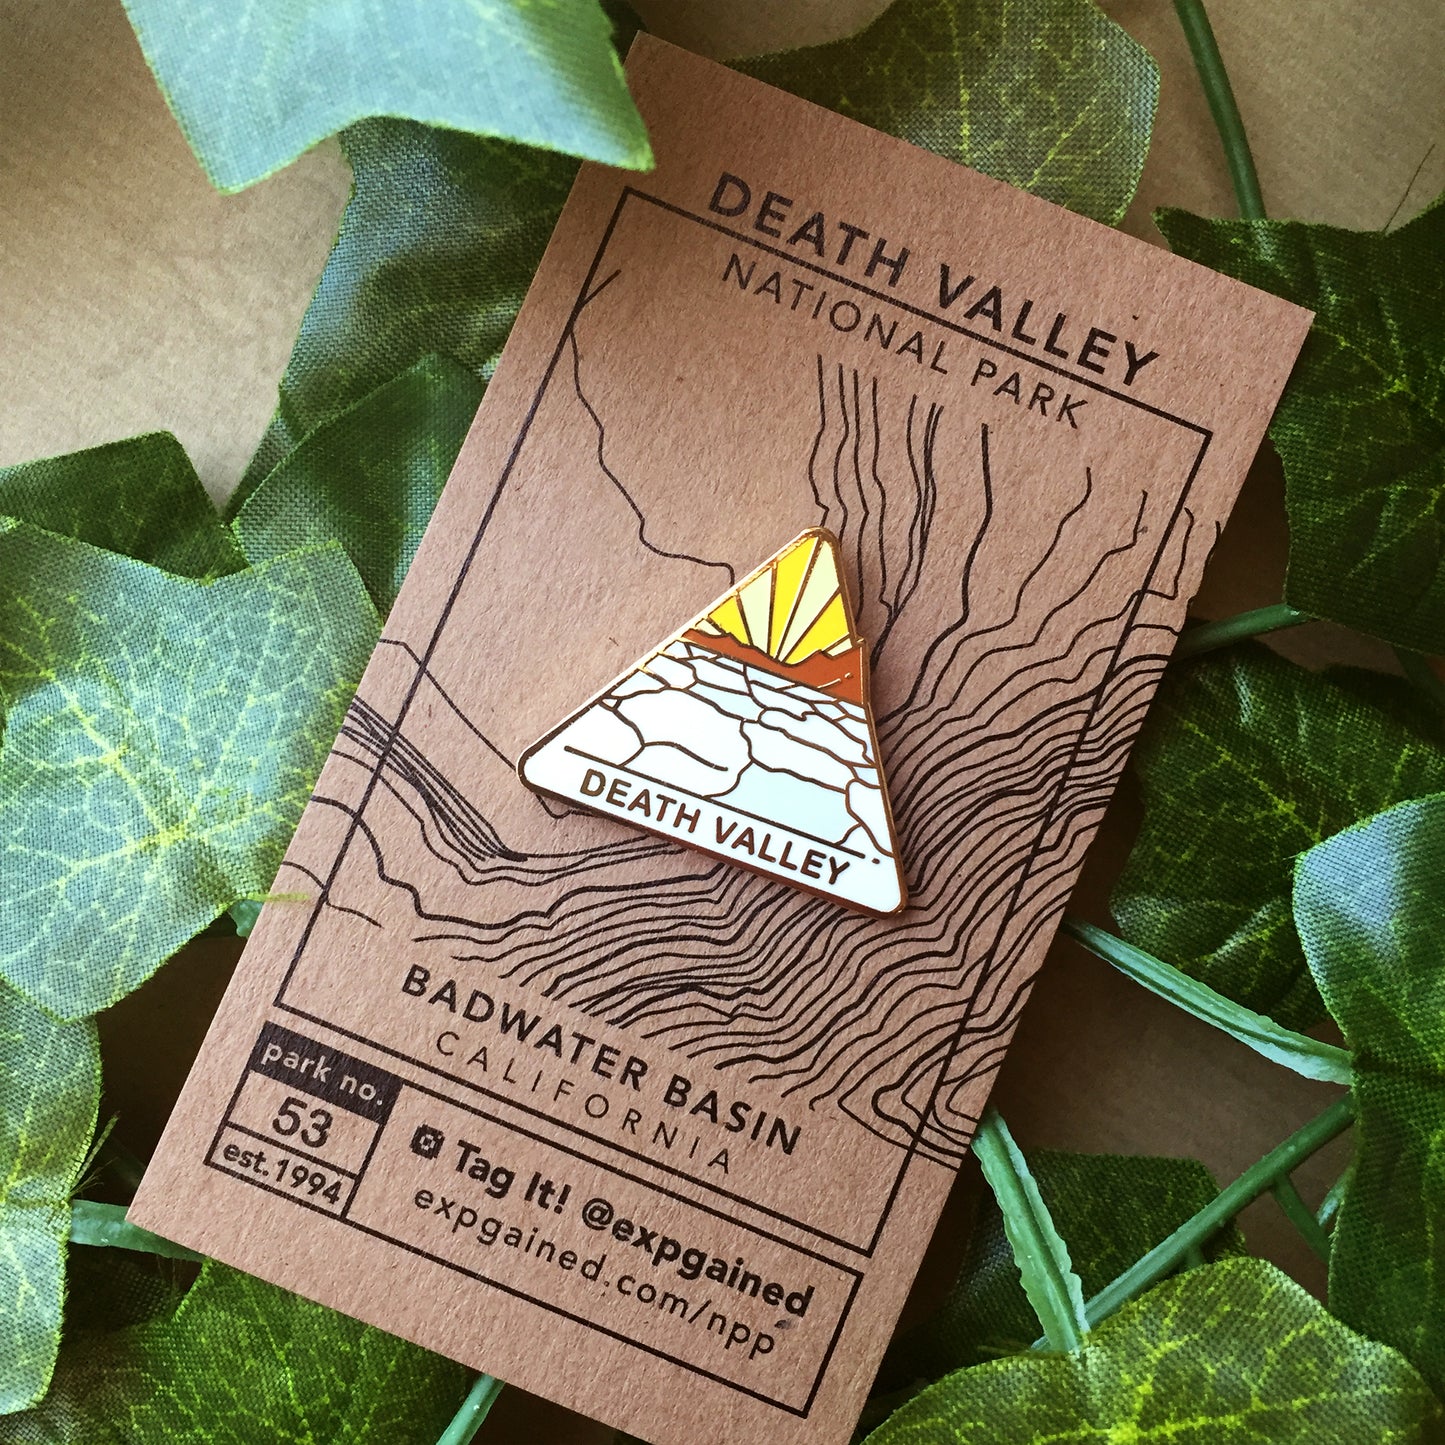 Triangle Death Valley national park enamel pin featuring a view from the beehive hike on a brown business card size backing card with a topo map of the Badwater Basin location.